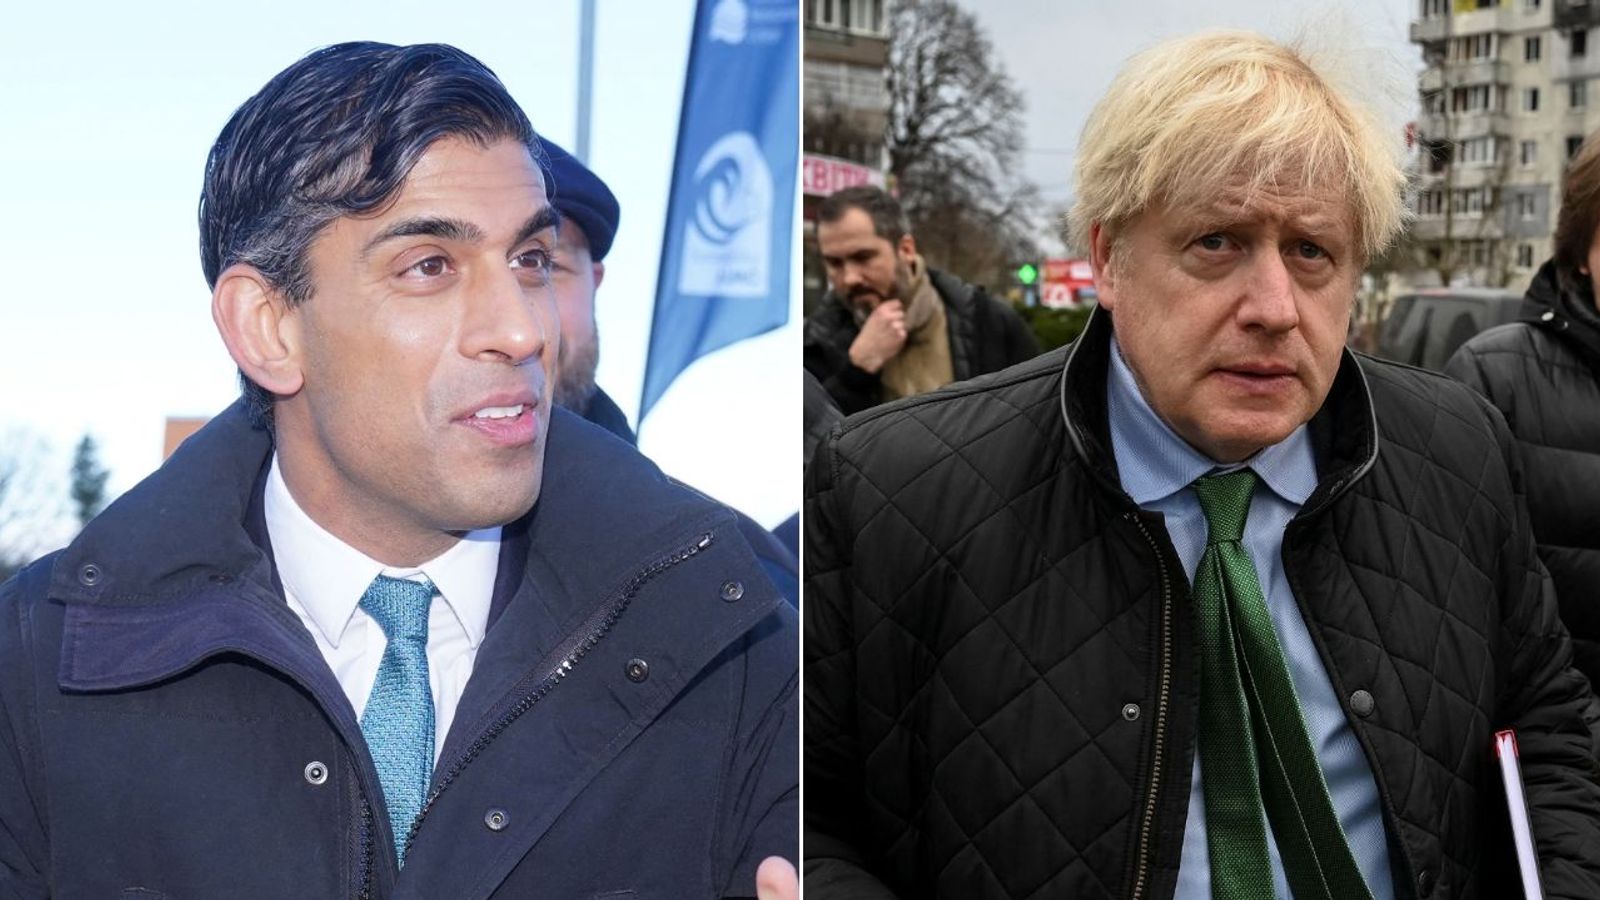 Boris Johnson thought about sending Rishi Sunak foul-mouthed video over resignation 'betrayal', former aide claims